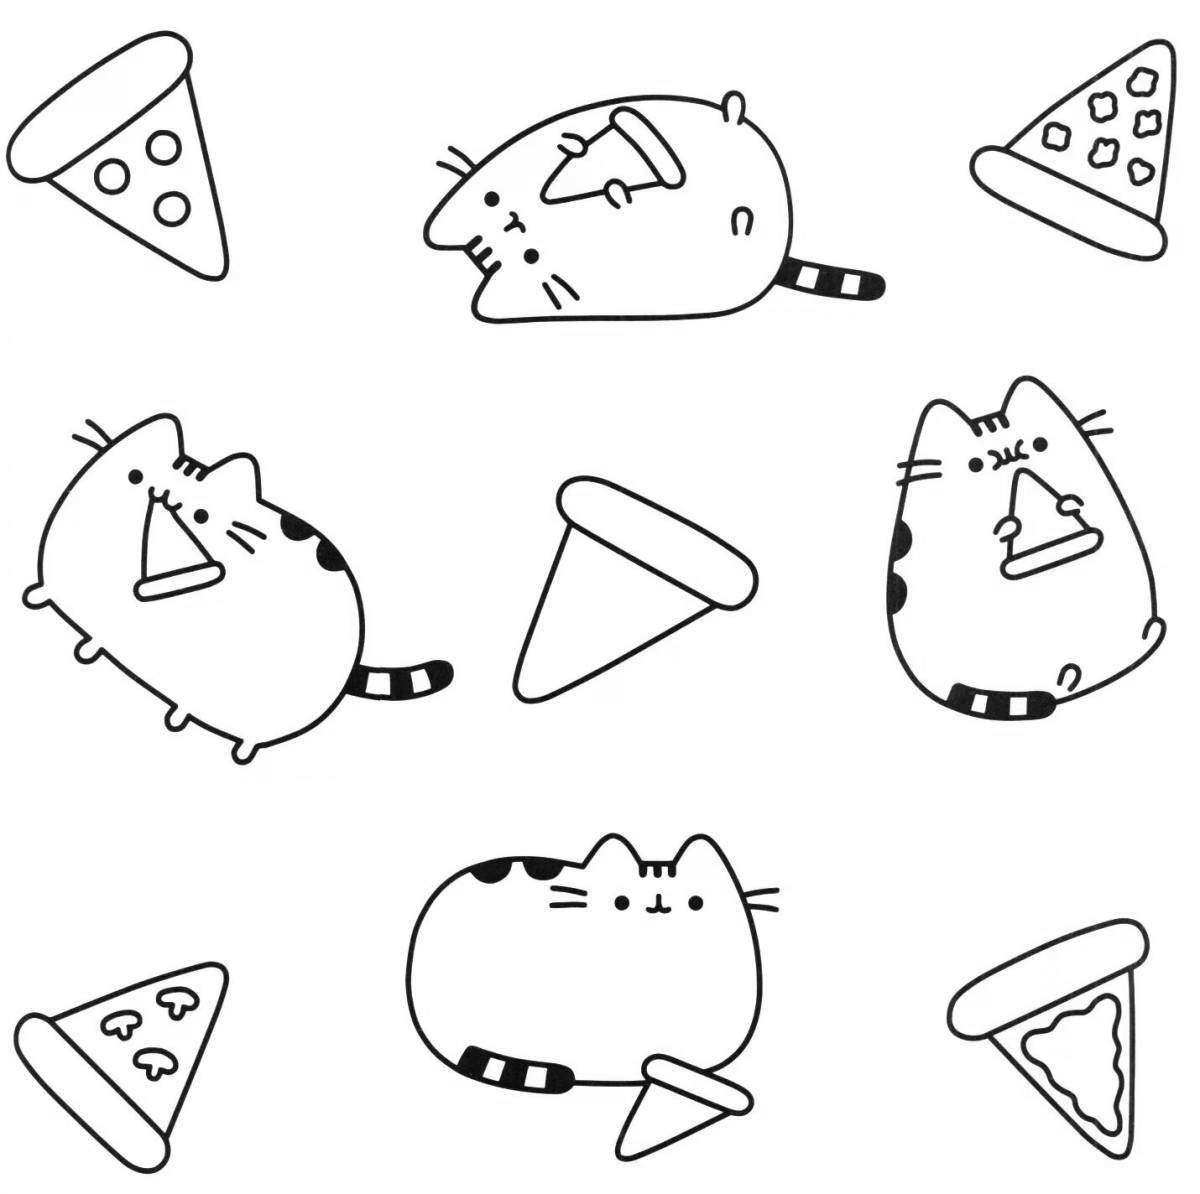 Fun coloring pages for stickers